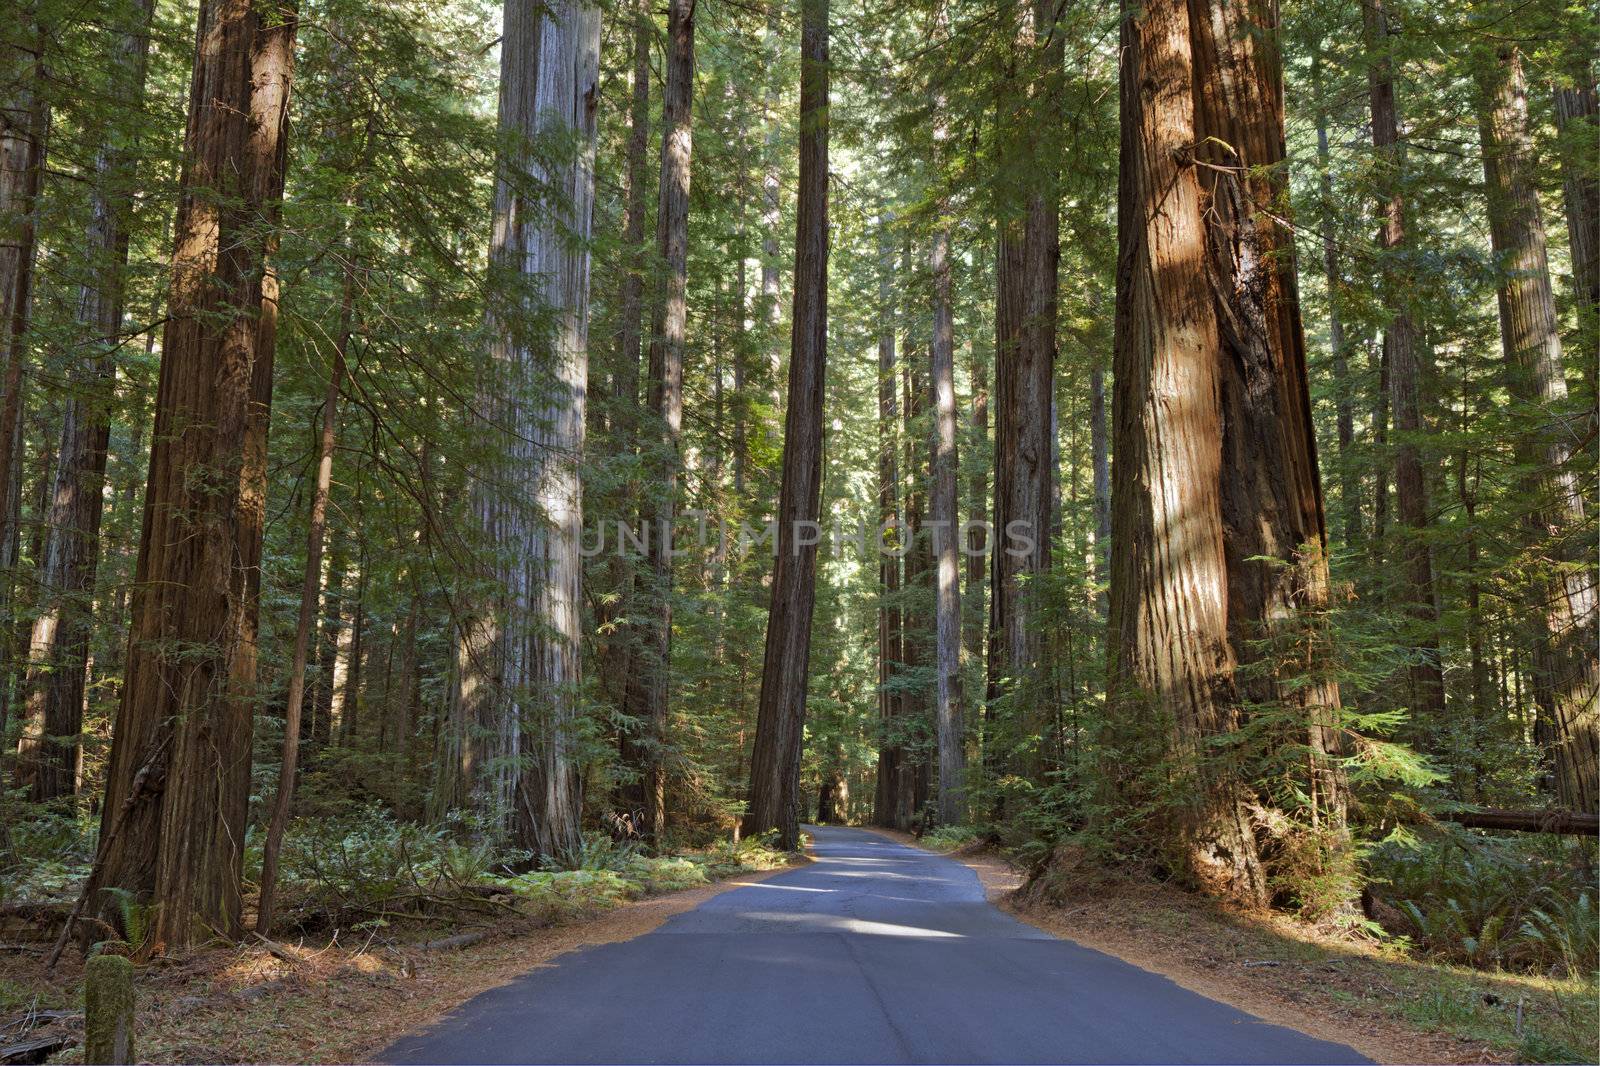 Road running through a redwood grove in California by sgoodwin4813